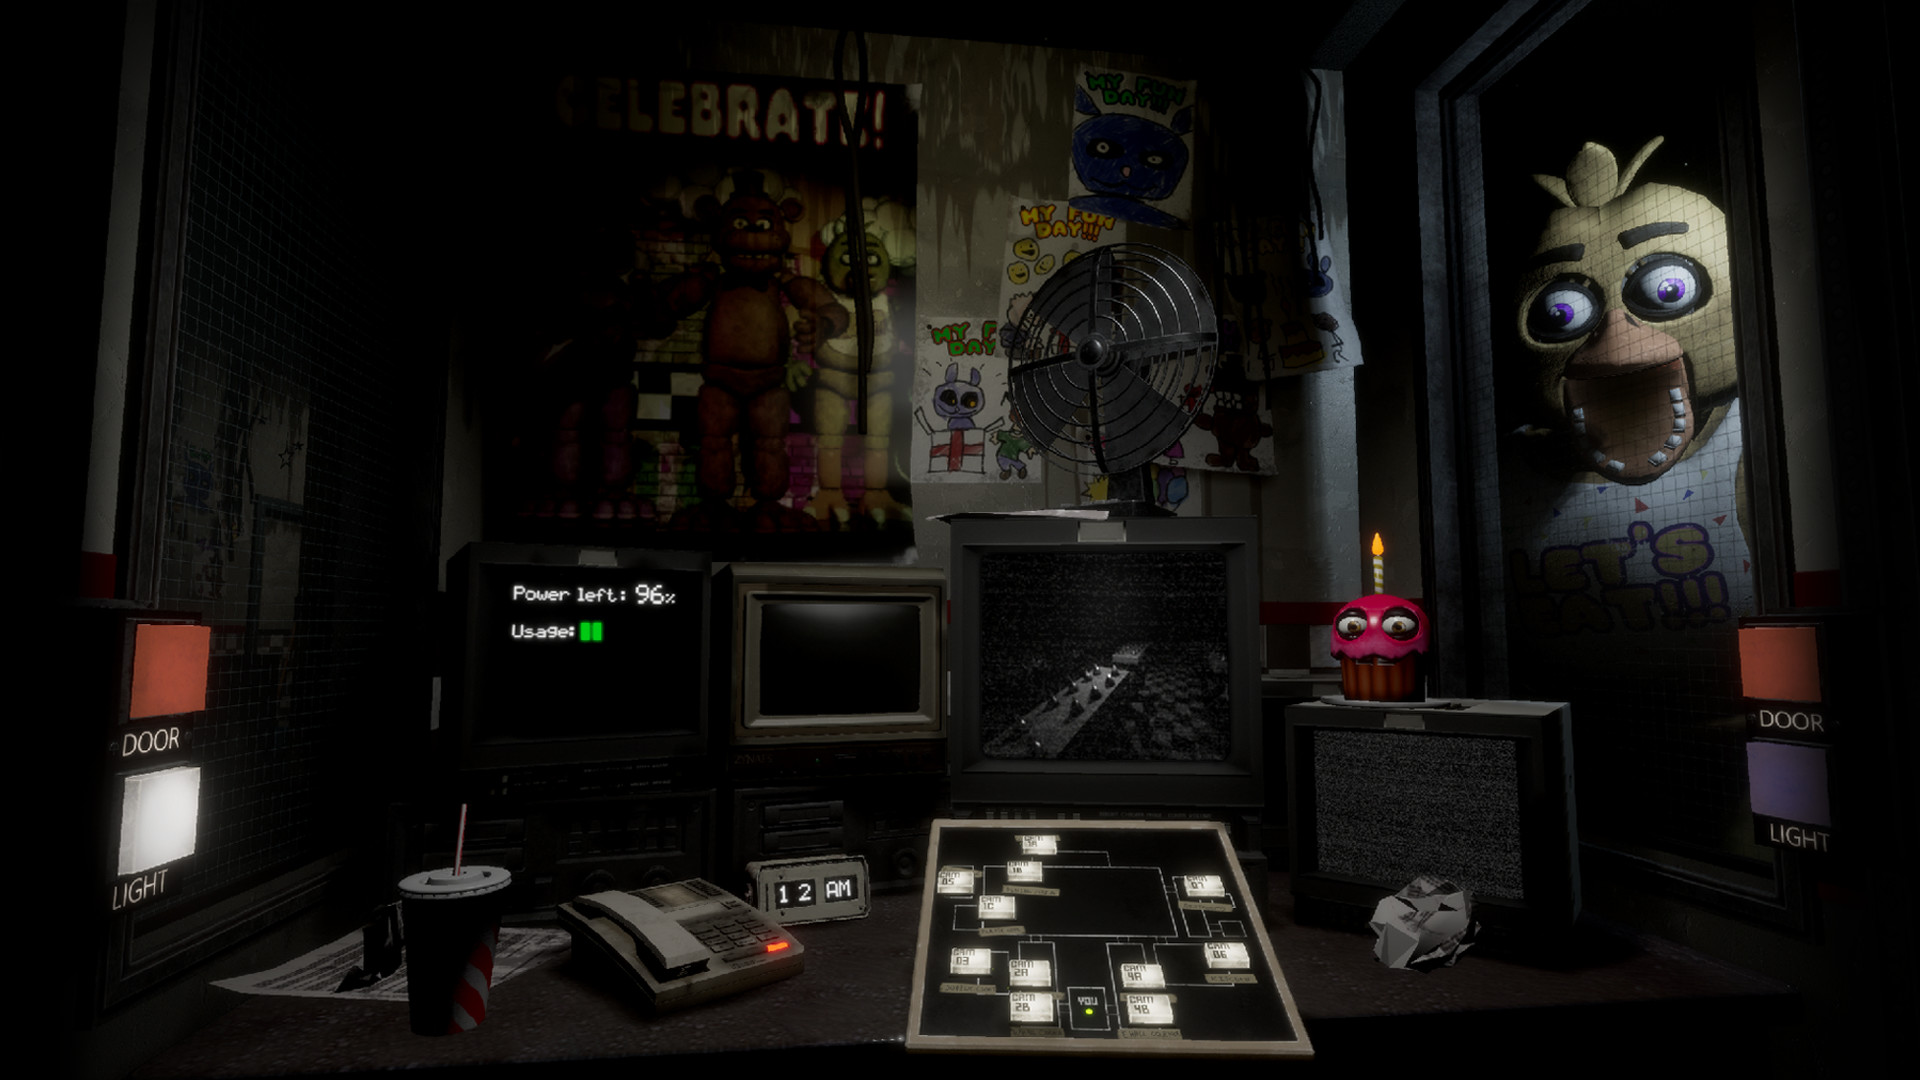 Five Nights at Freddy's Collection (7 Games), Masquerade Repack